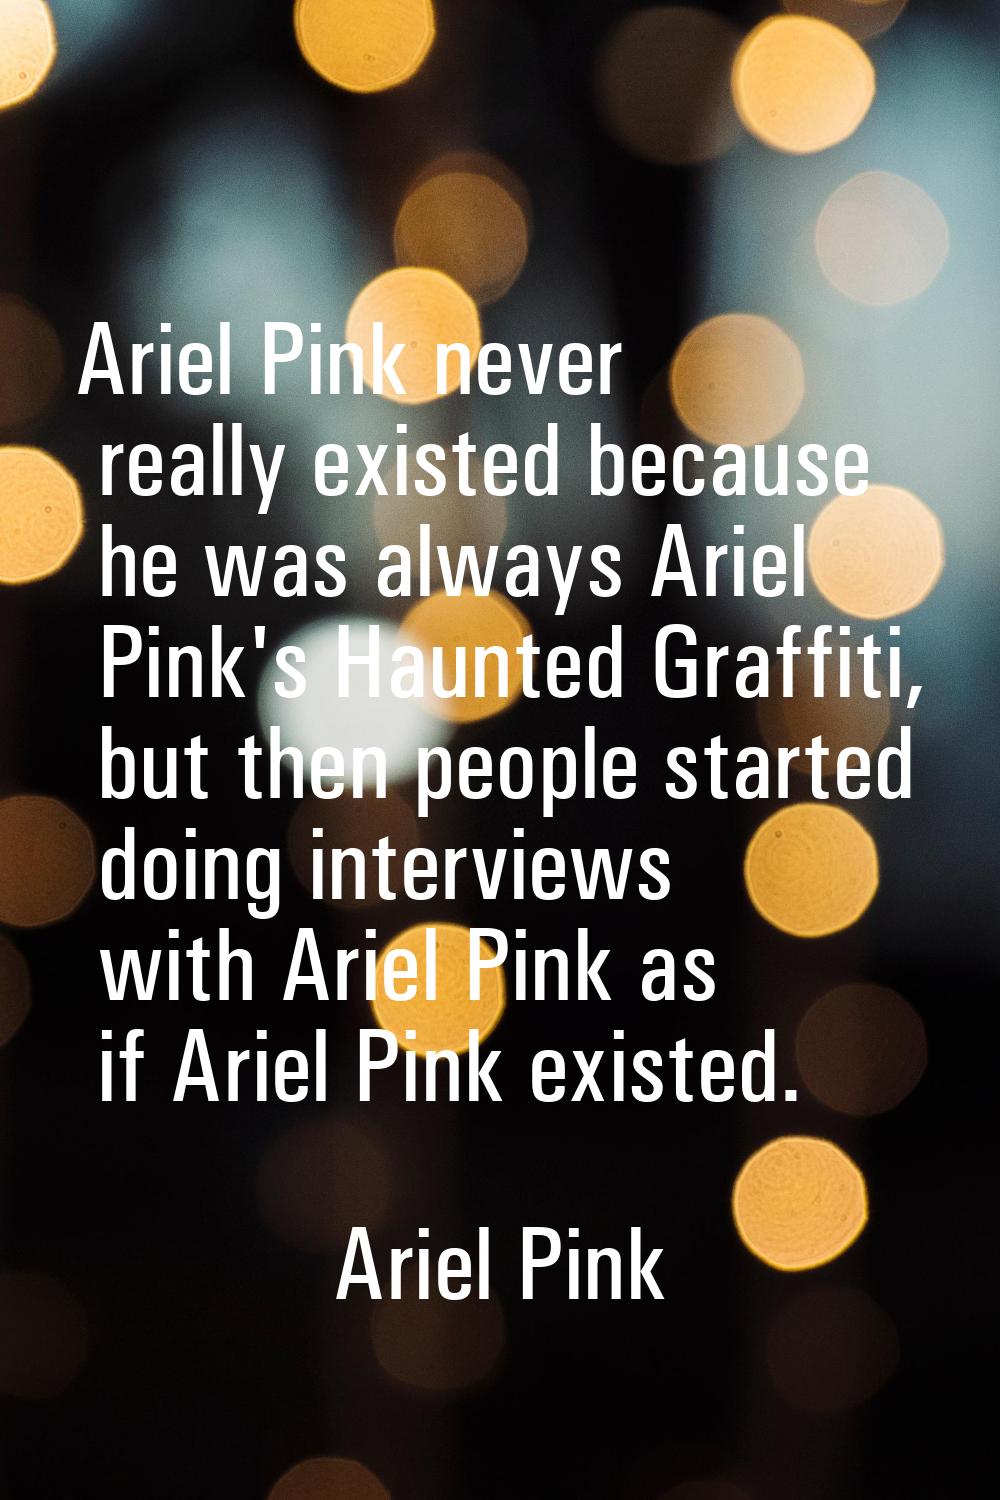 Ariel Pink never really existed because he was always Ariel Pink's Haunted Graffiti, but then peopl